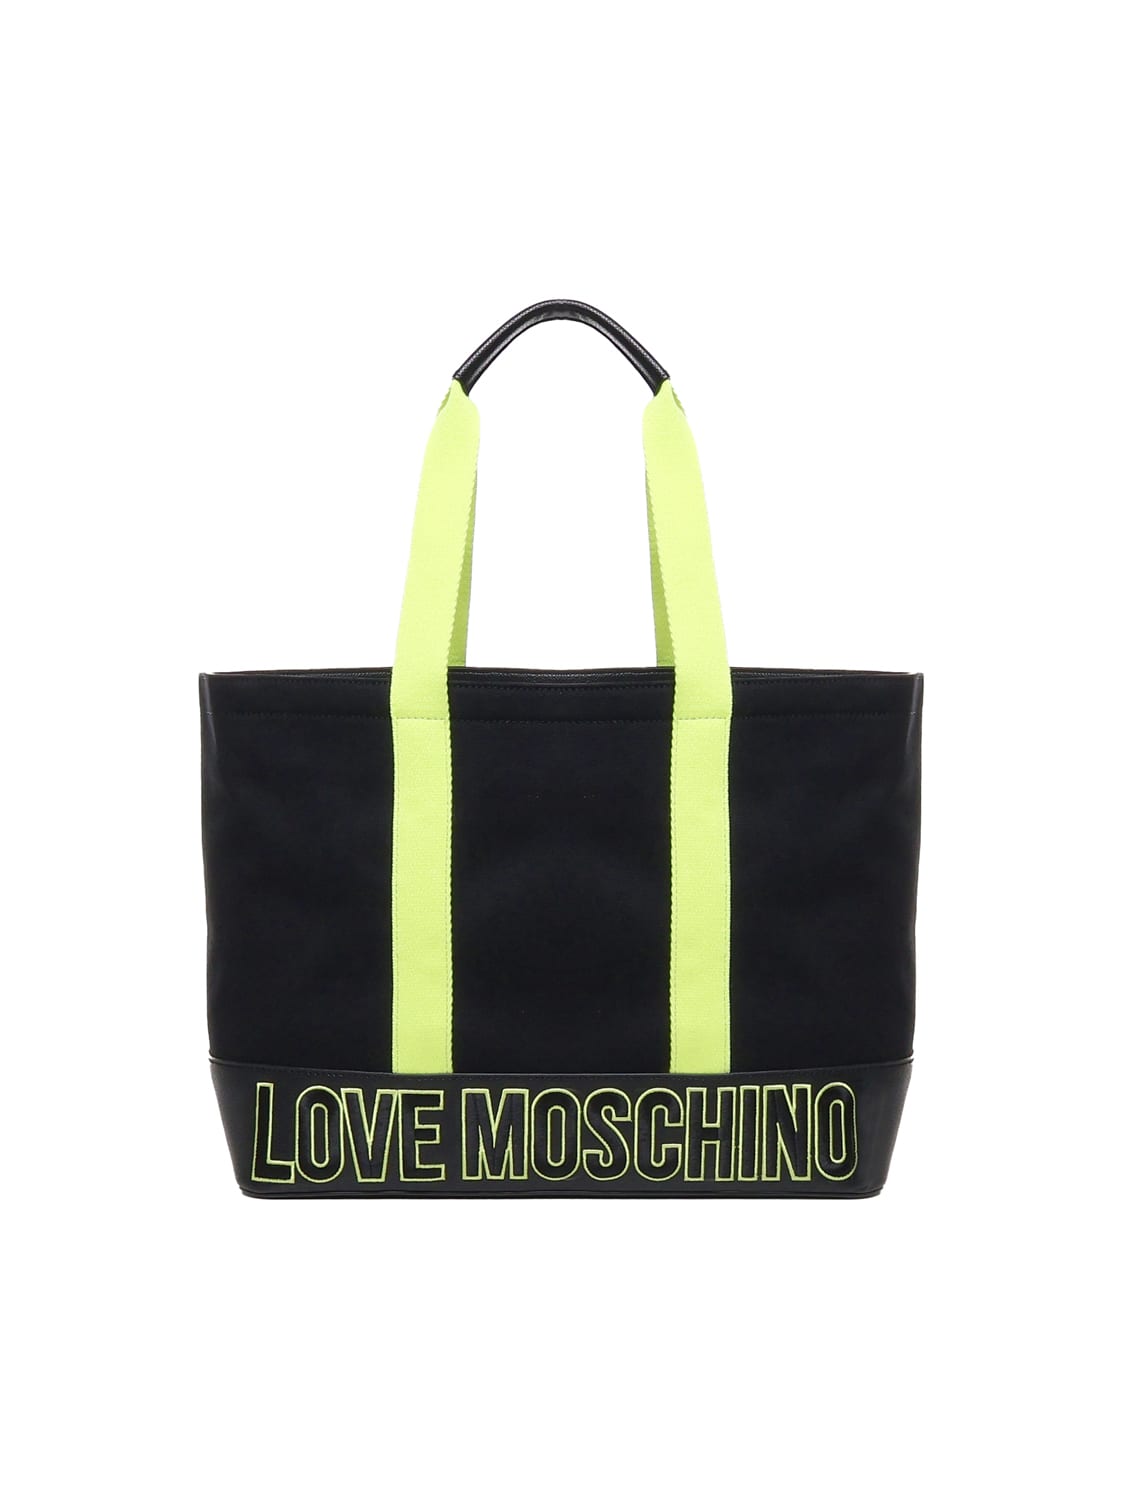 LOVE MOSCHINO TOTE BAG WITH COLOR-BLOCK DESIGN